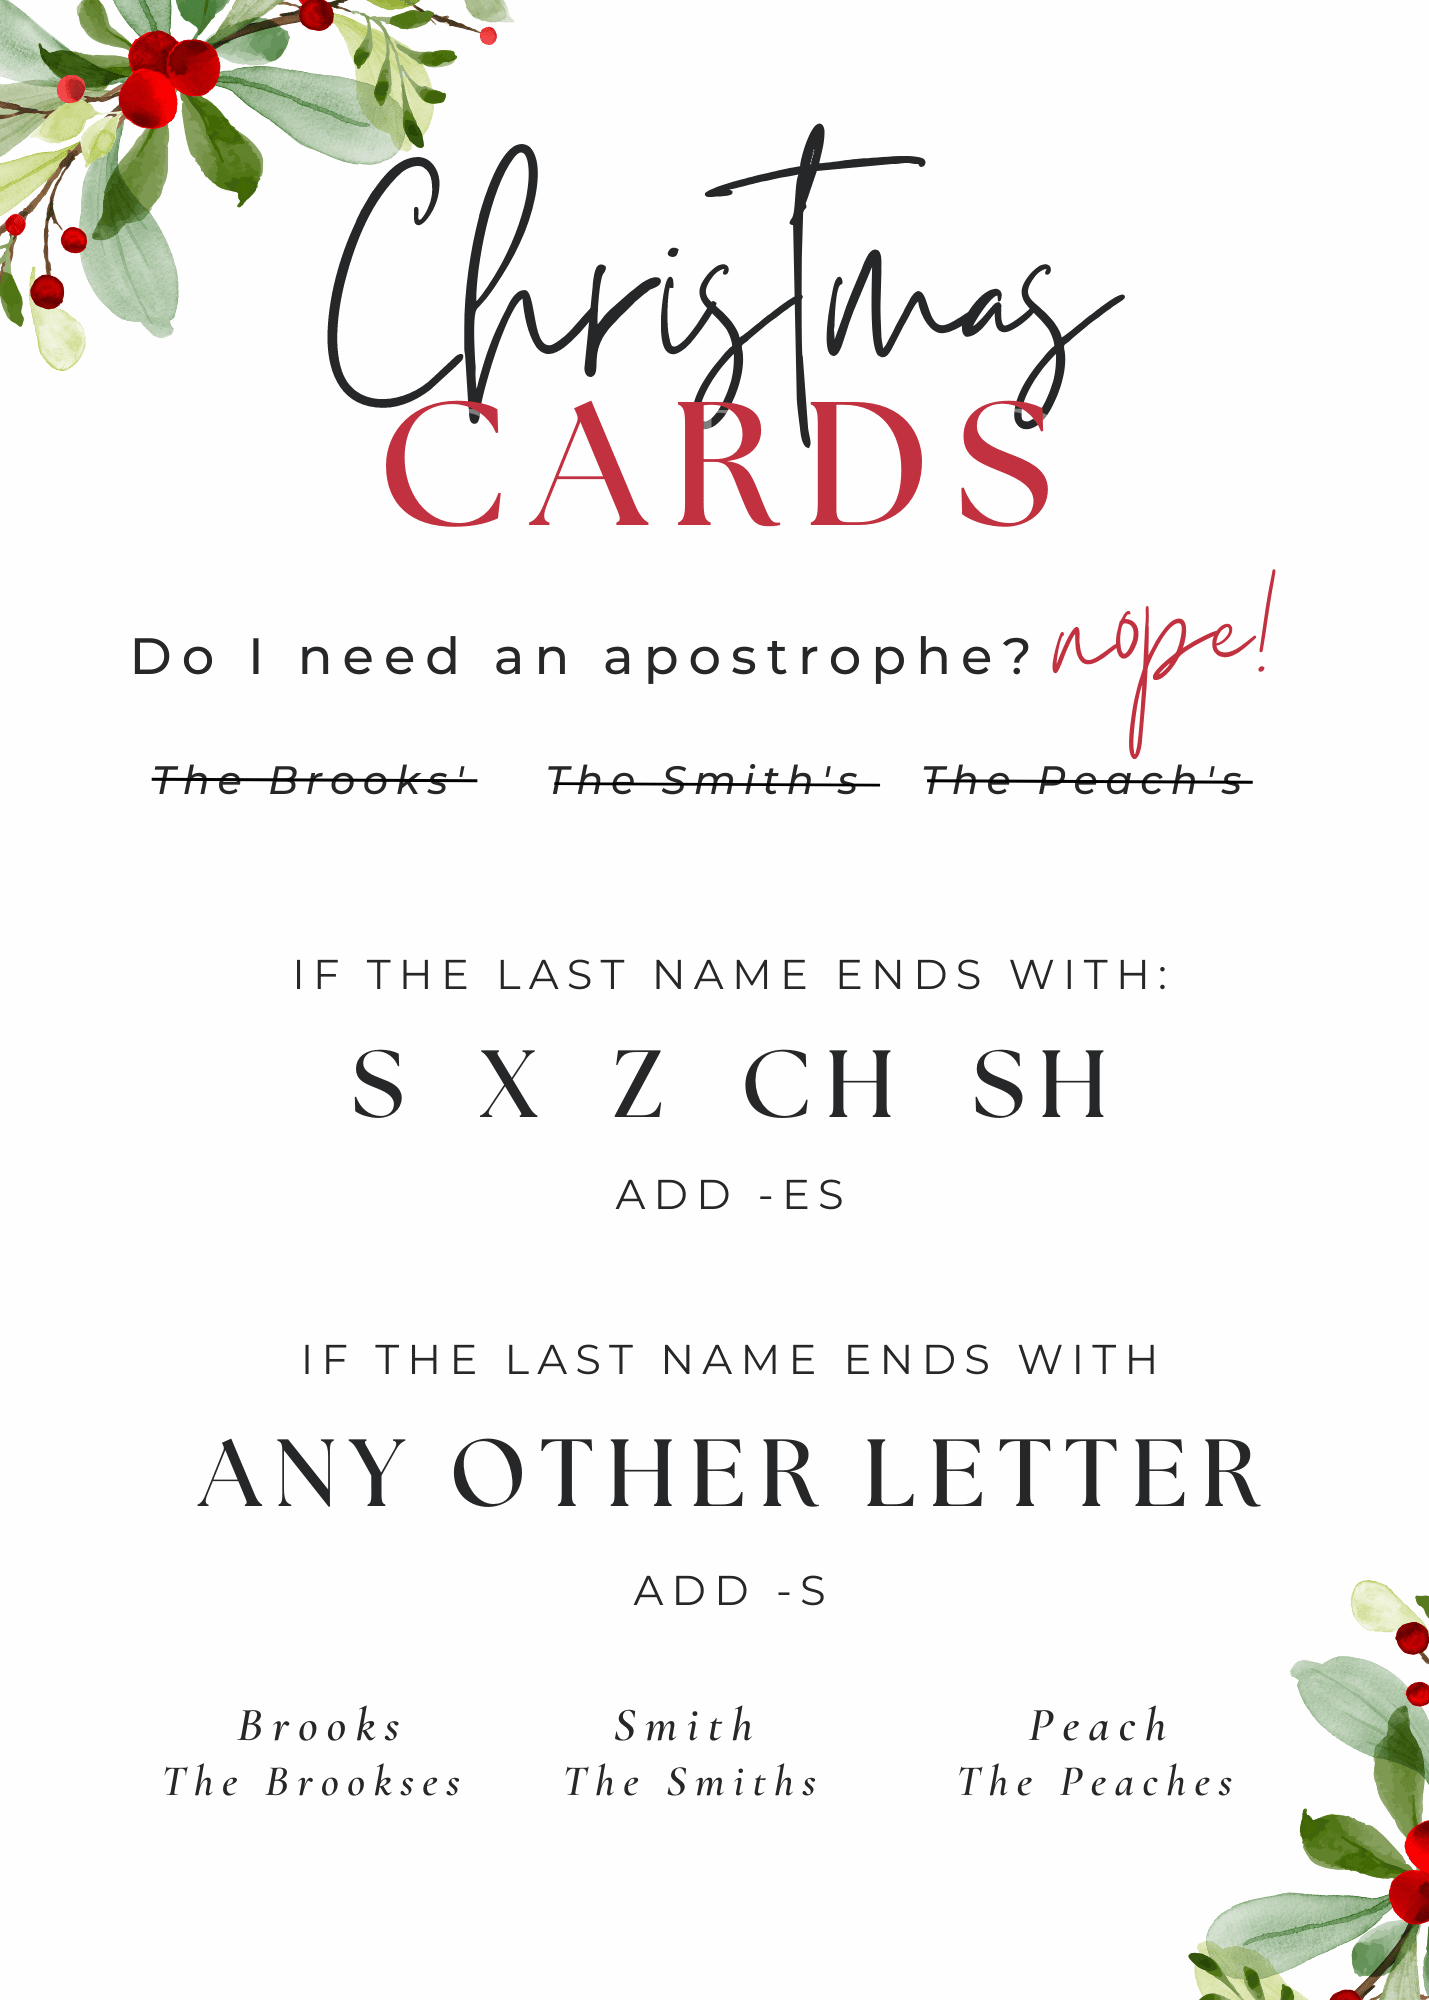 How to Address Christmas Cards with Names